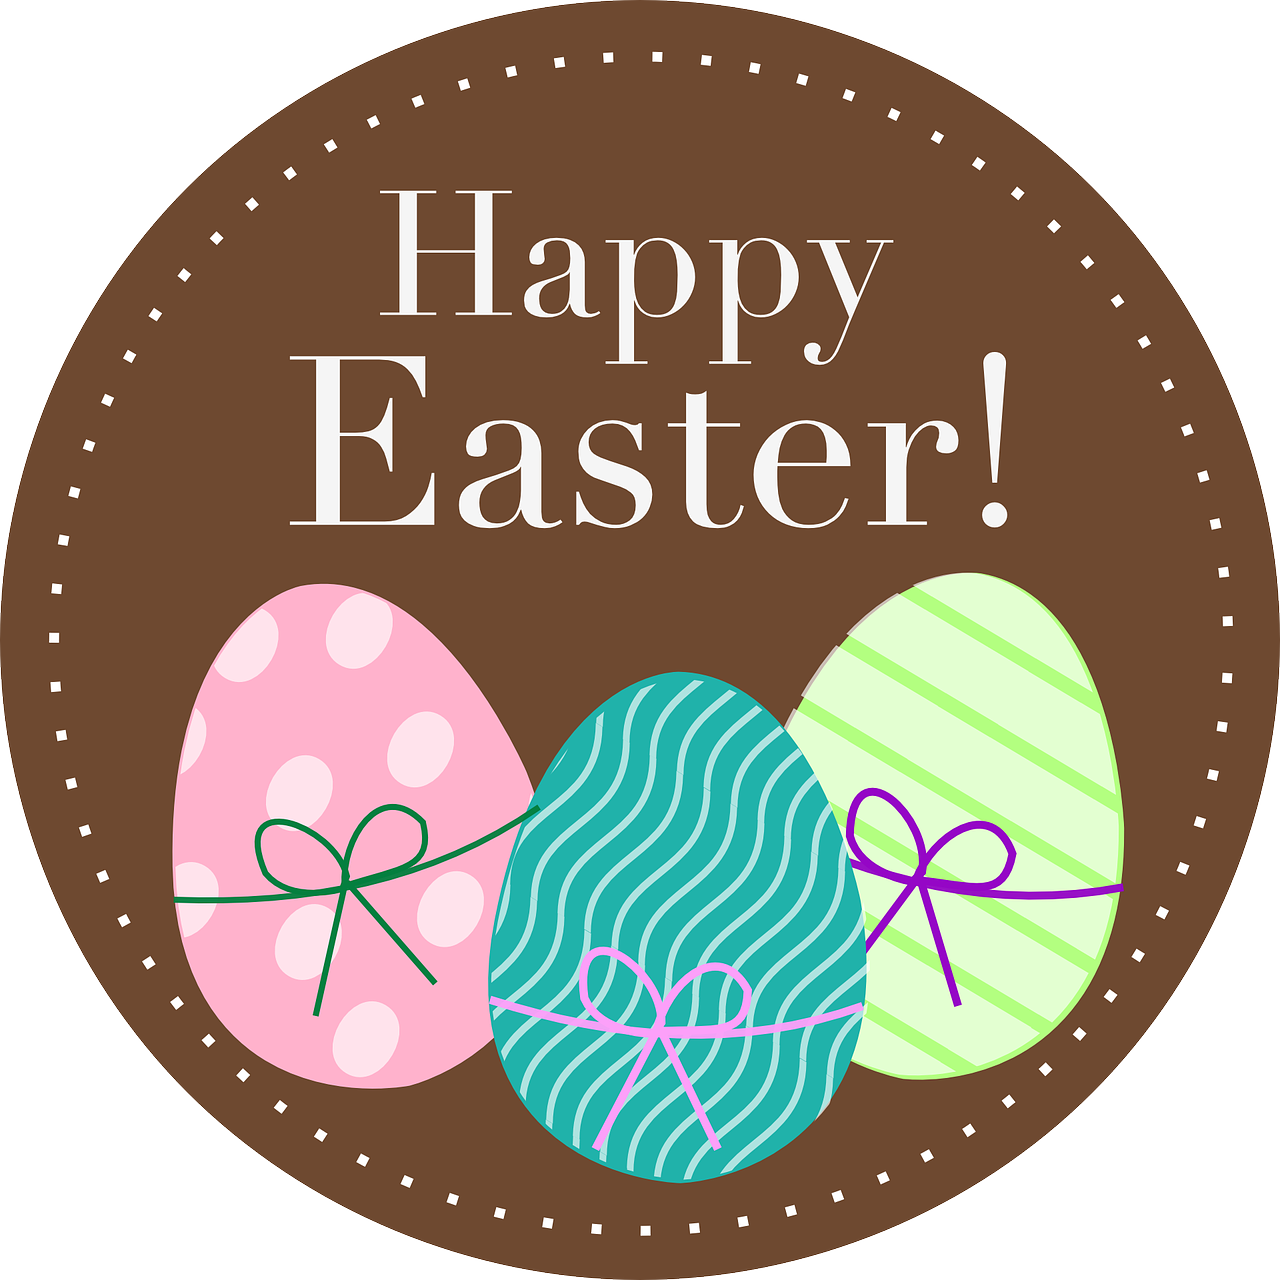 7 Happy Easter Images to Post on Facebook, Twitter, Instagram